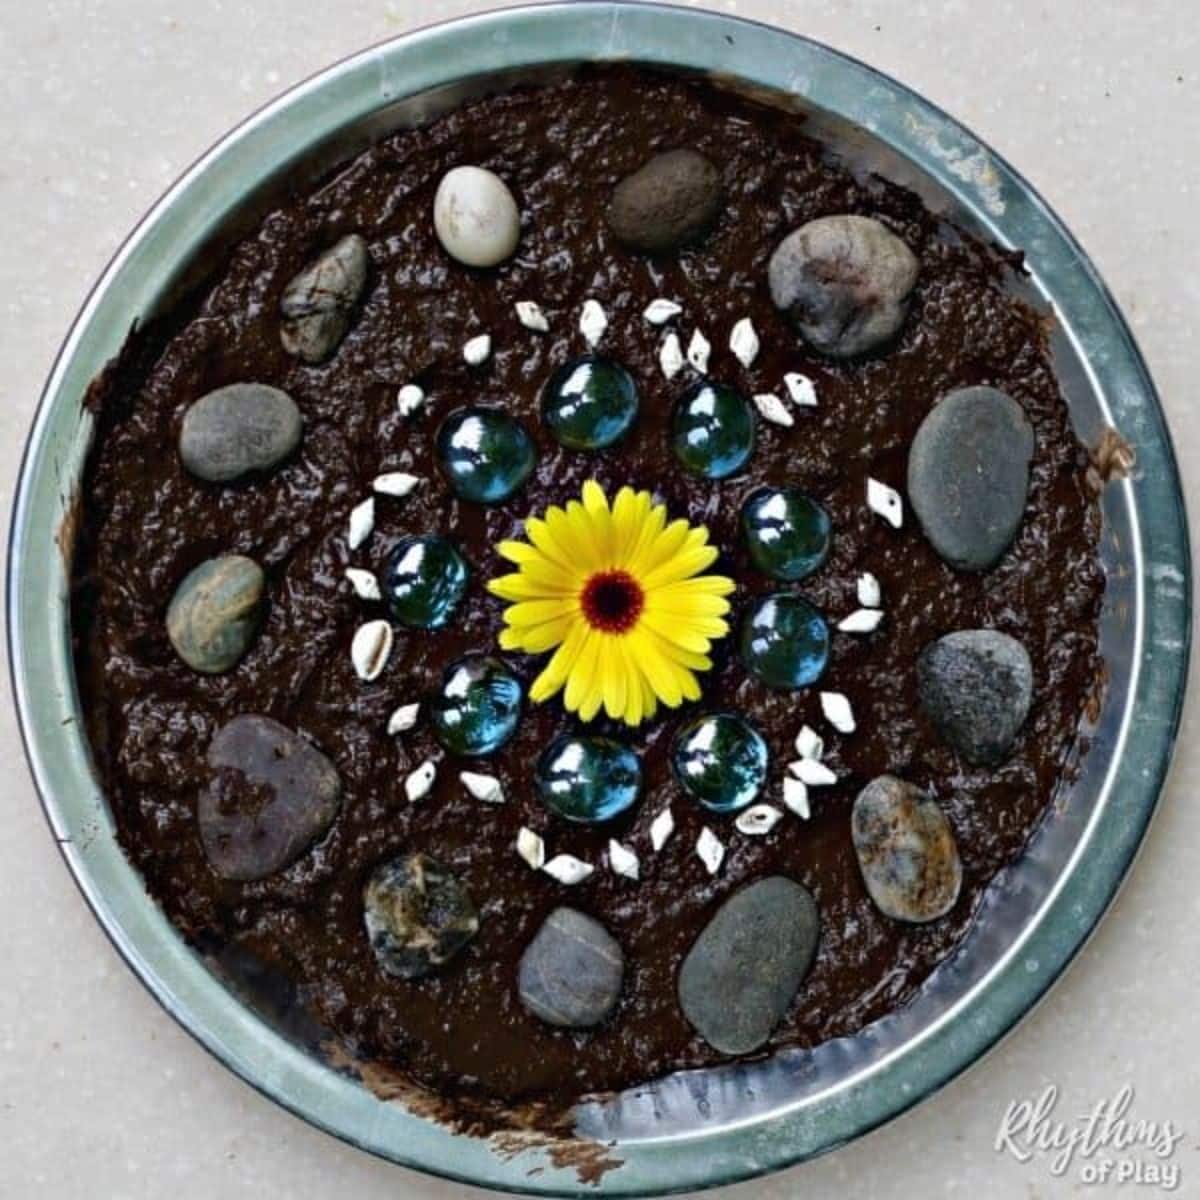 Mud pie in a mold with a yellow flower and different types of rocks.